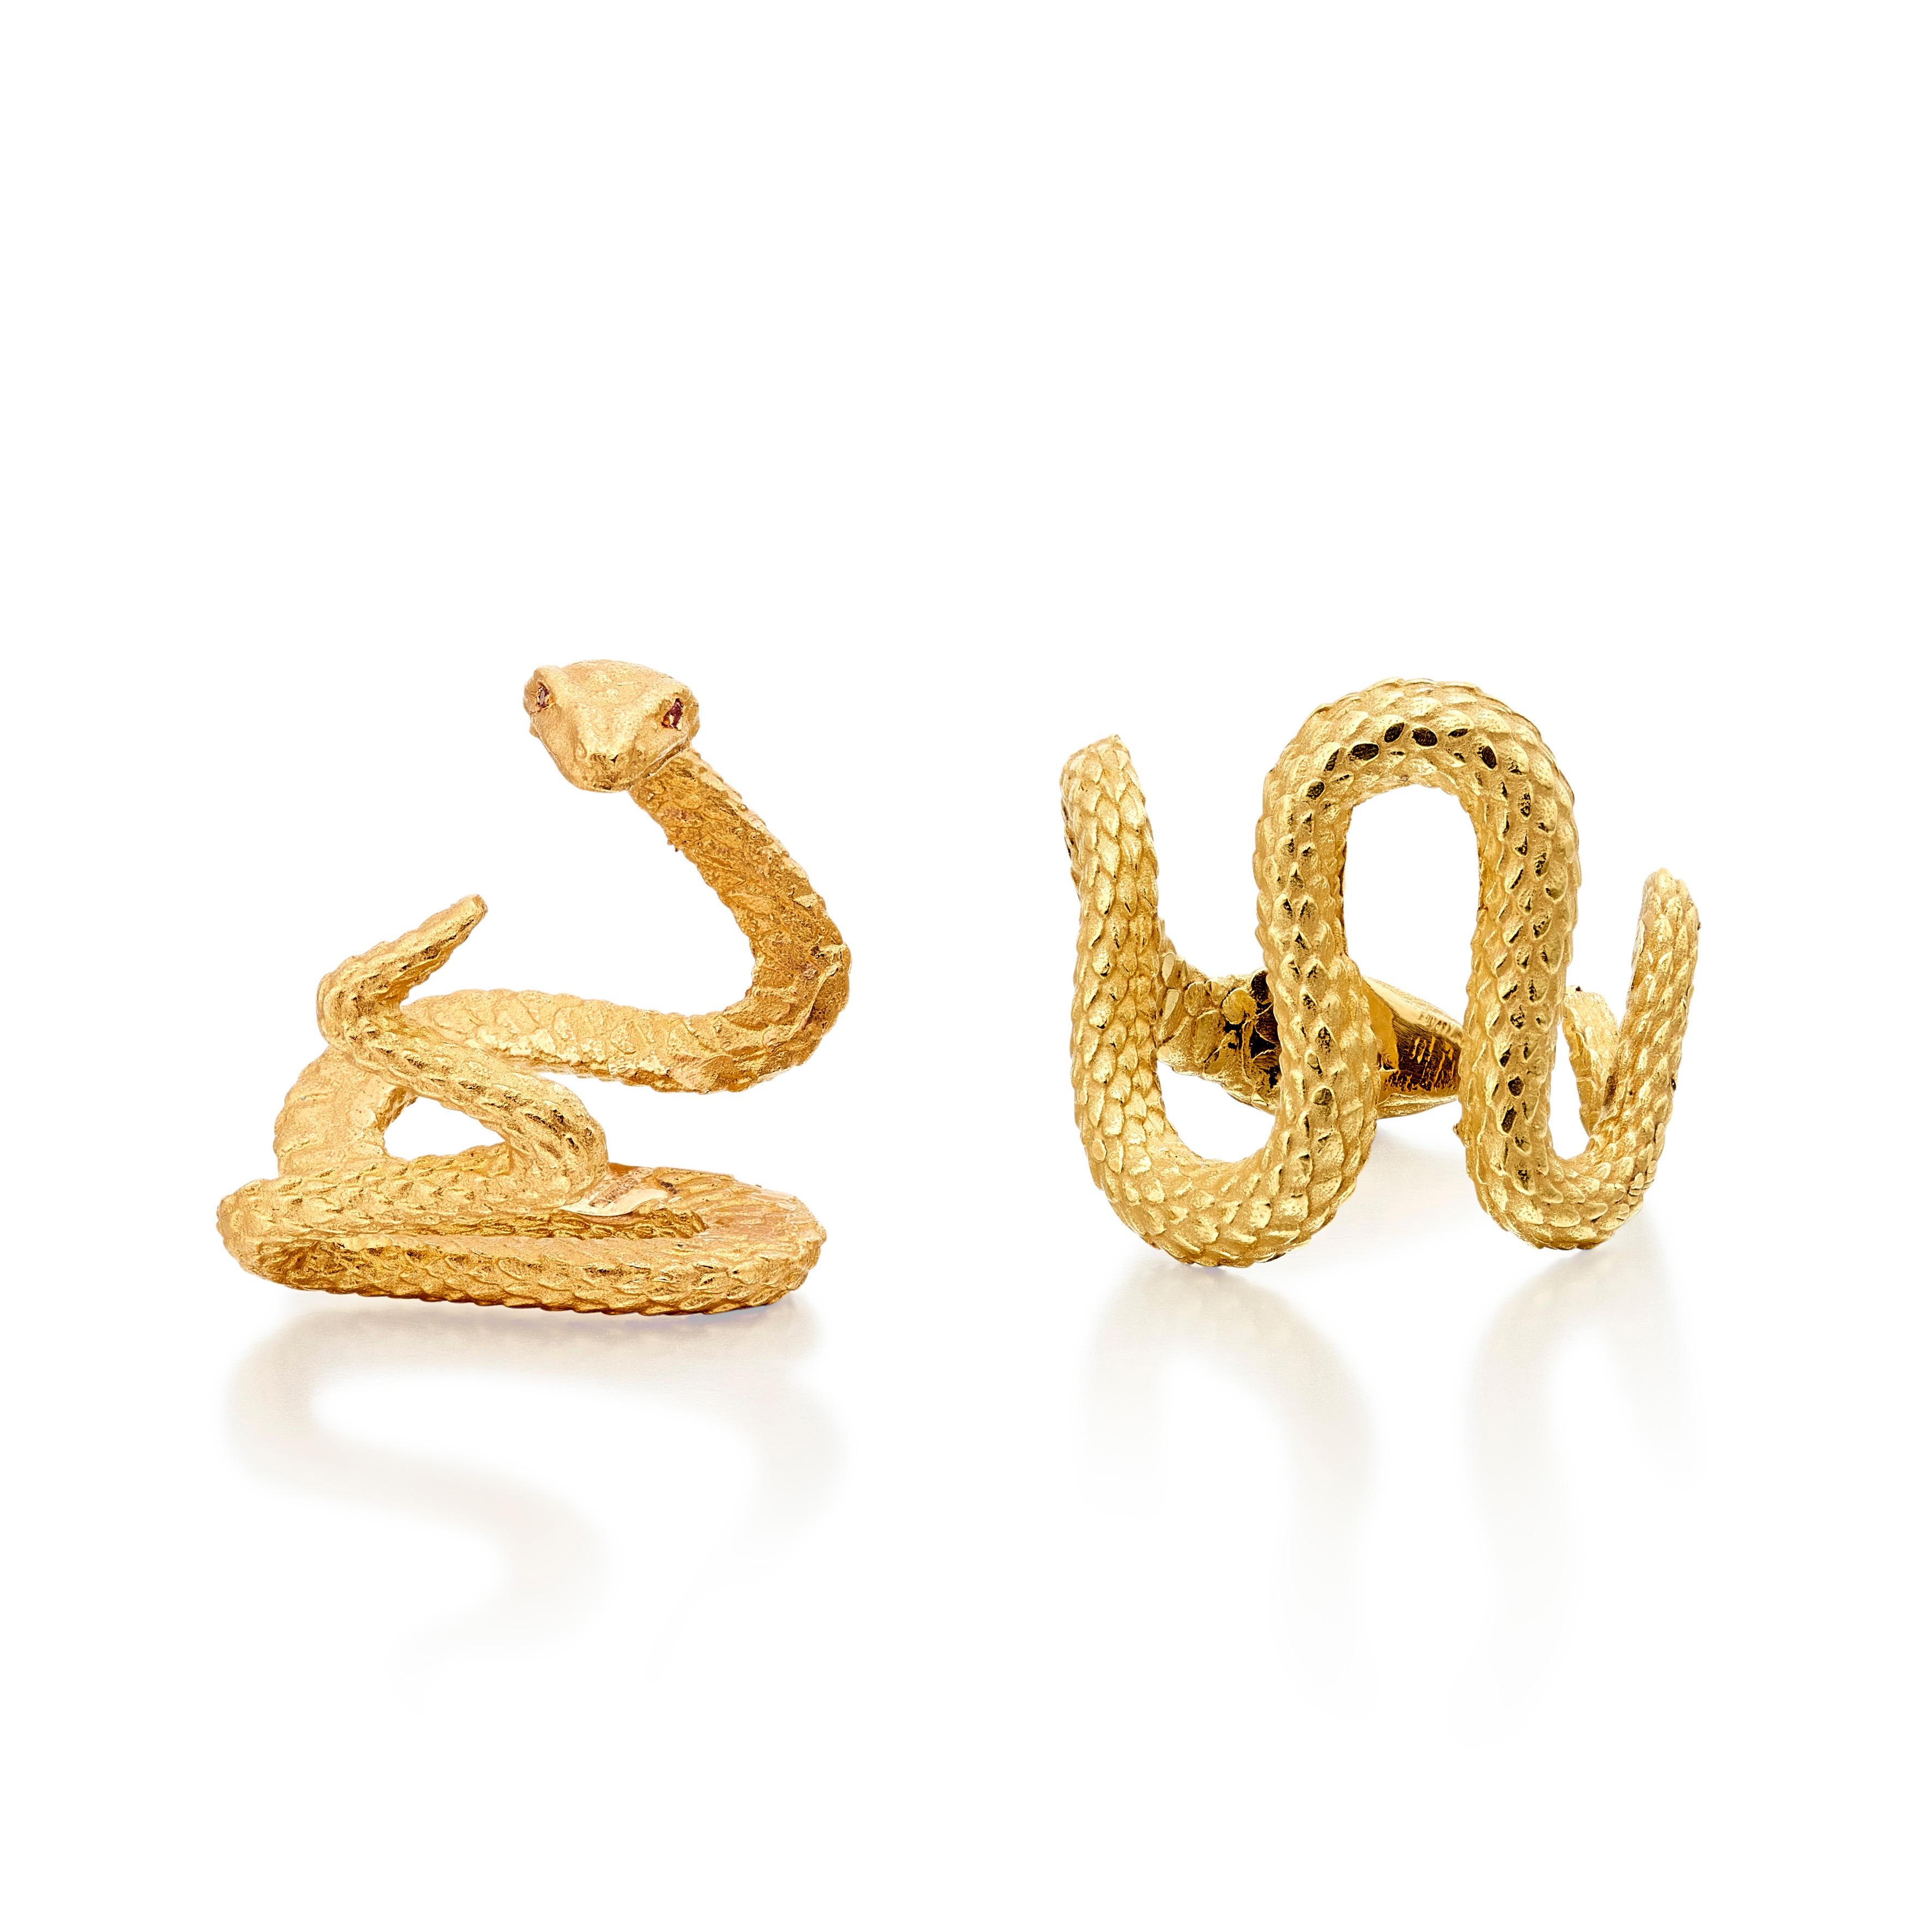 An unusual snake ring from Lilly Hastedt's 